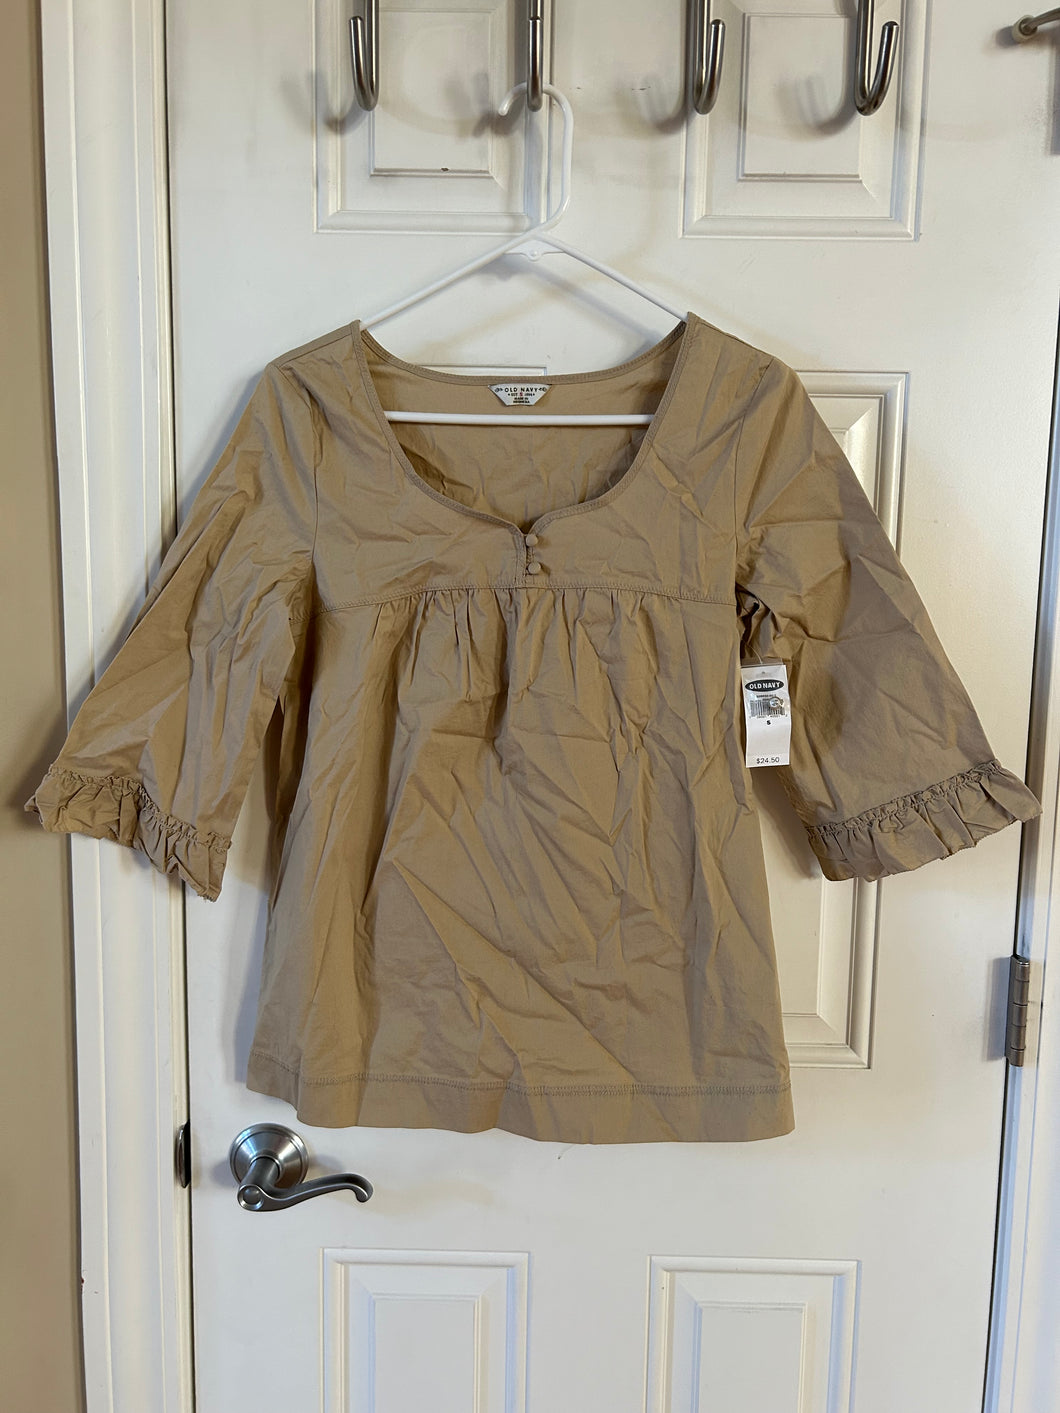 Old Navy - New! Tags on! Khaki babydoll type blouse with pockets! Ruffle sleeve detail.  Adult Small